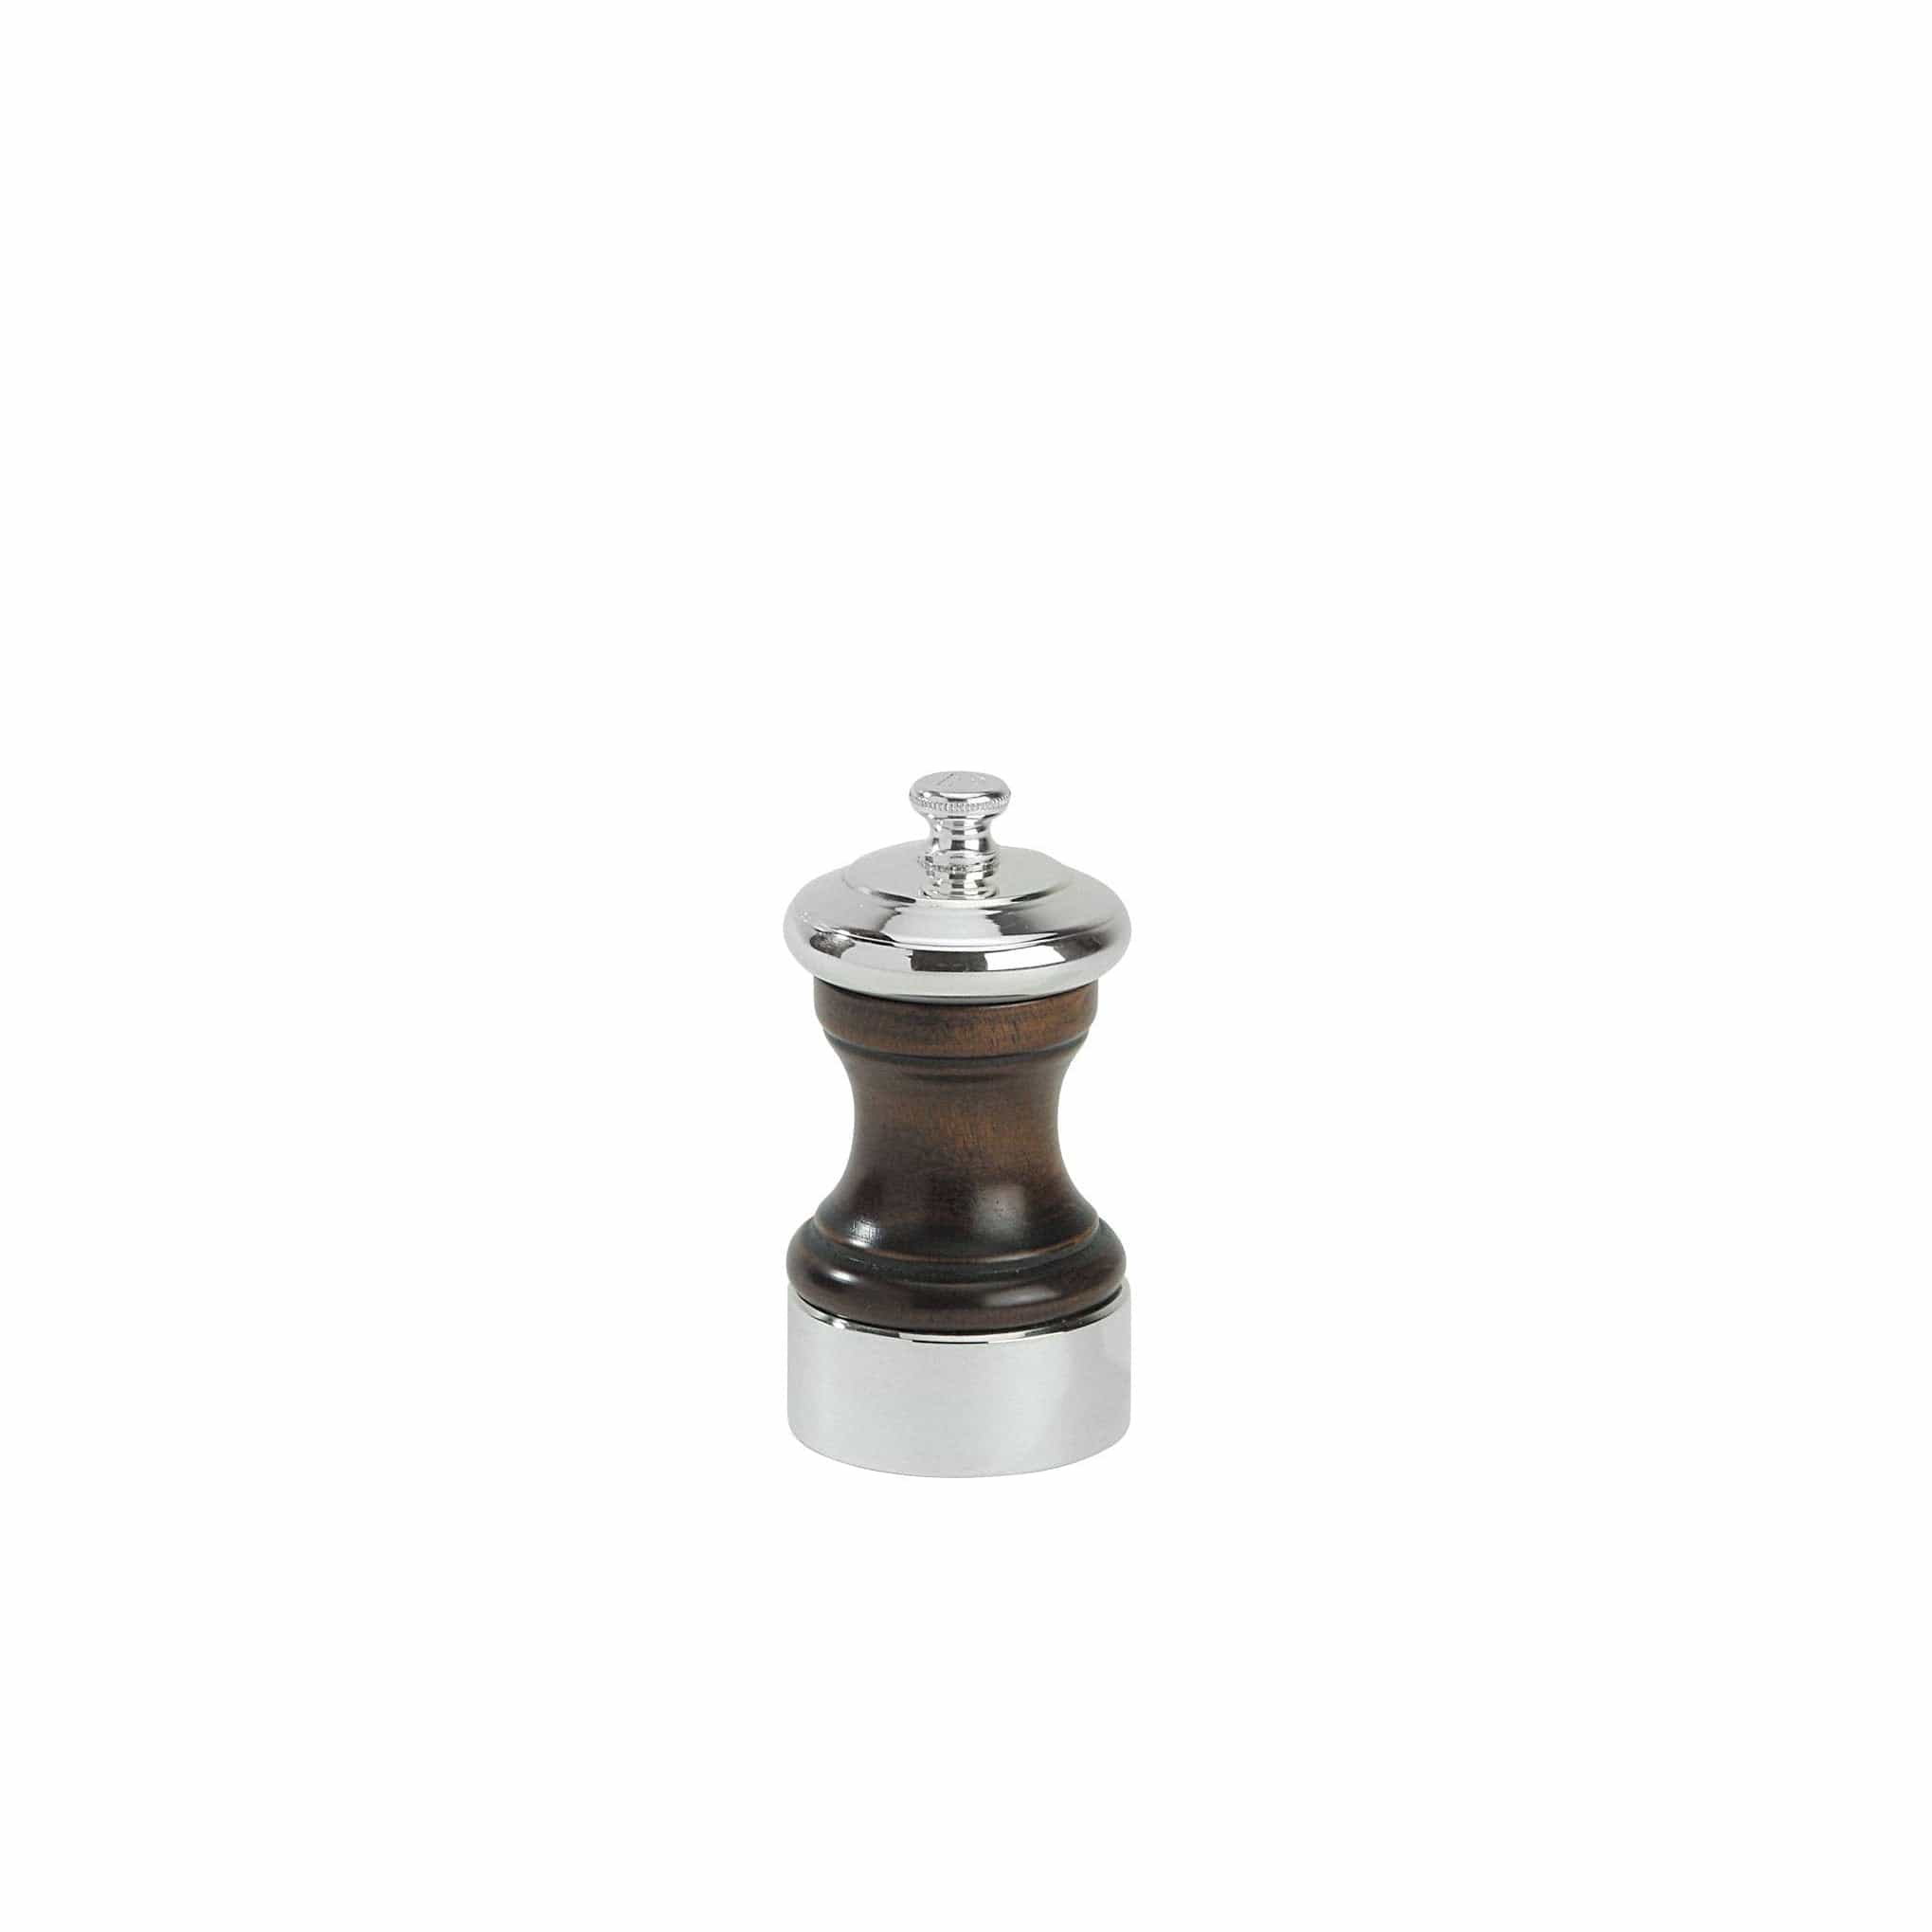 Peugeot Palace Pepper Mill Chocolate/Silver, 10cm